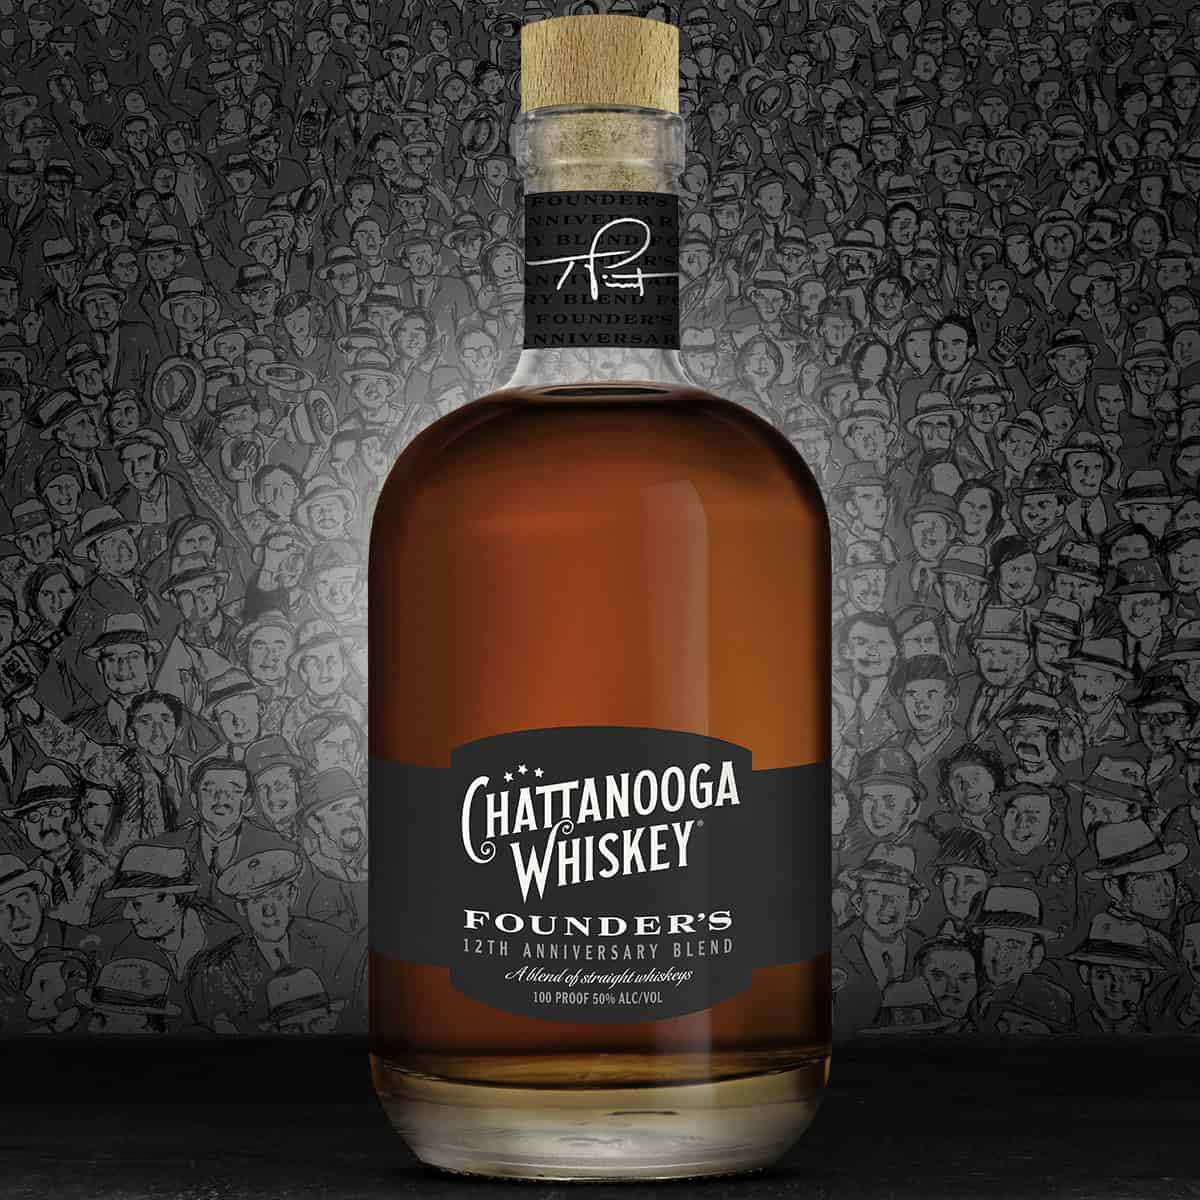 Whisky Advocate: Chattanooga Marks a Milestone